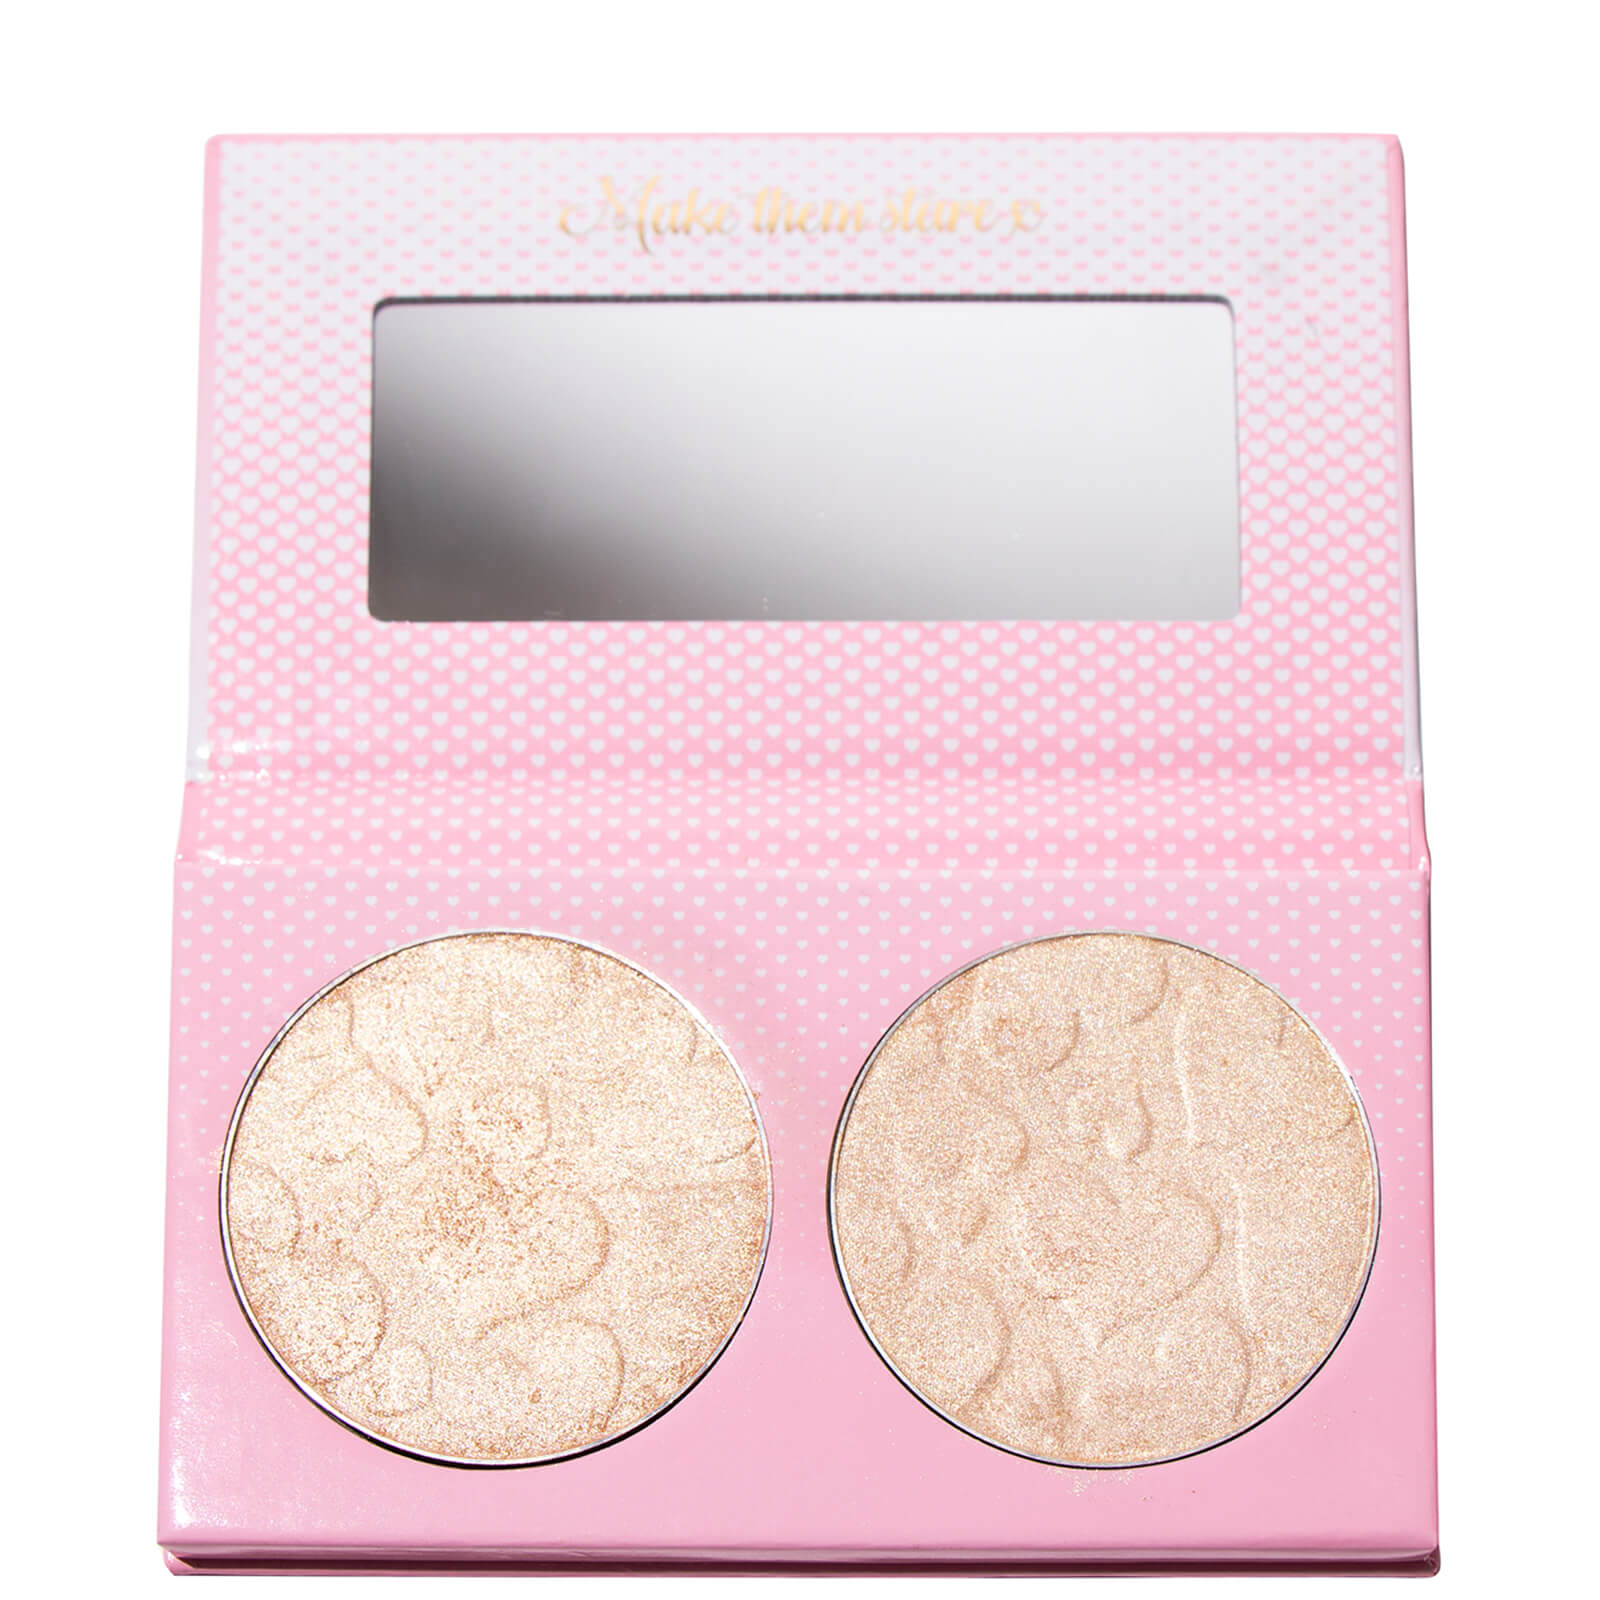 Image of Doll Beauty Highlighter 12g (Various Shades) - Doll Light Duo